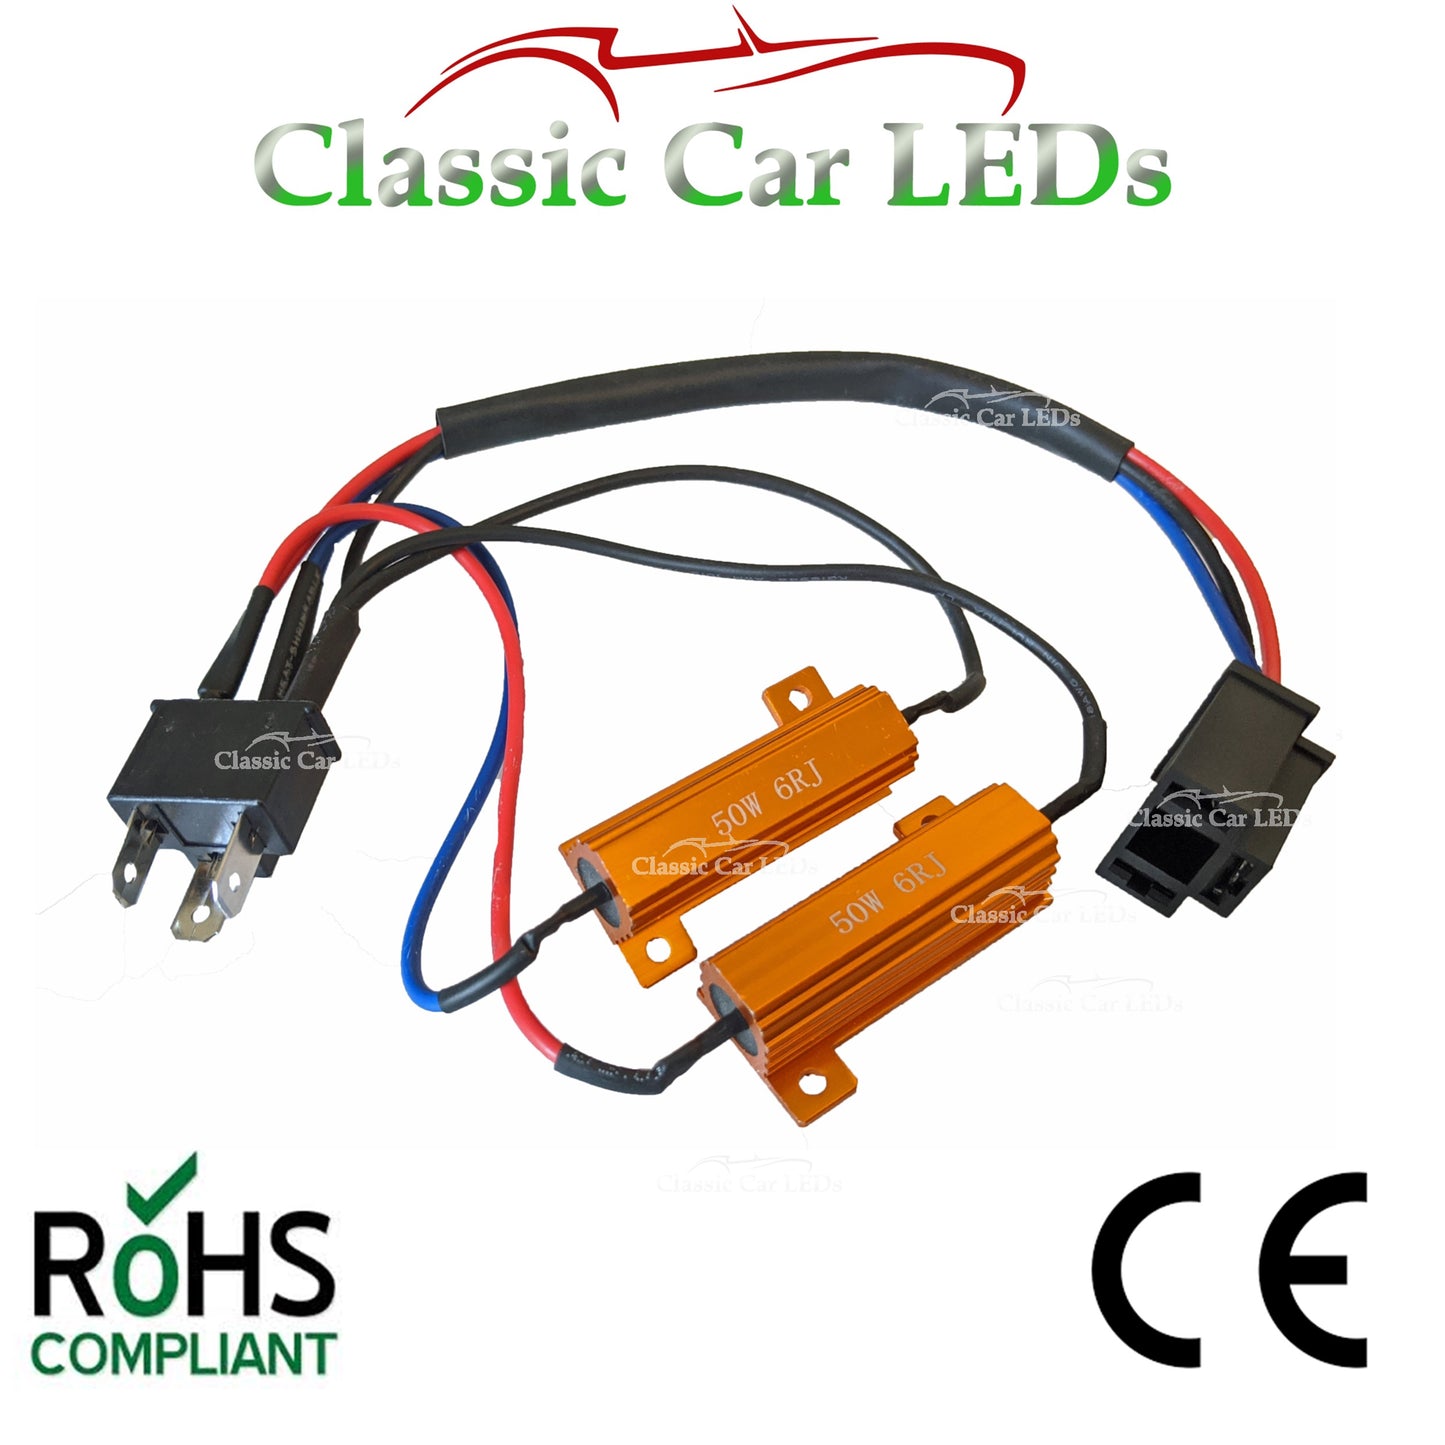 H4 LED CANBUS ERROR OBD WARNING CANCELLER BALLAST RESISTOR WIRING HARNESS 50W 6OHM